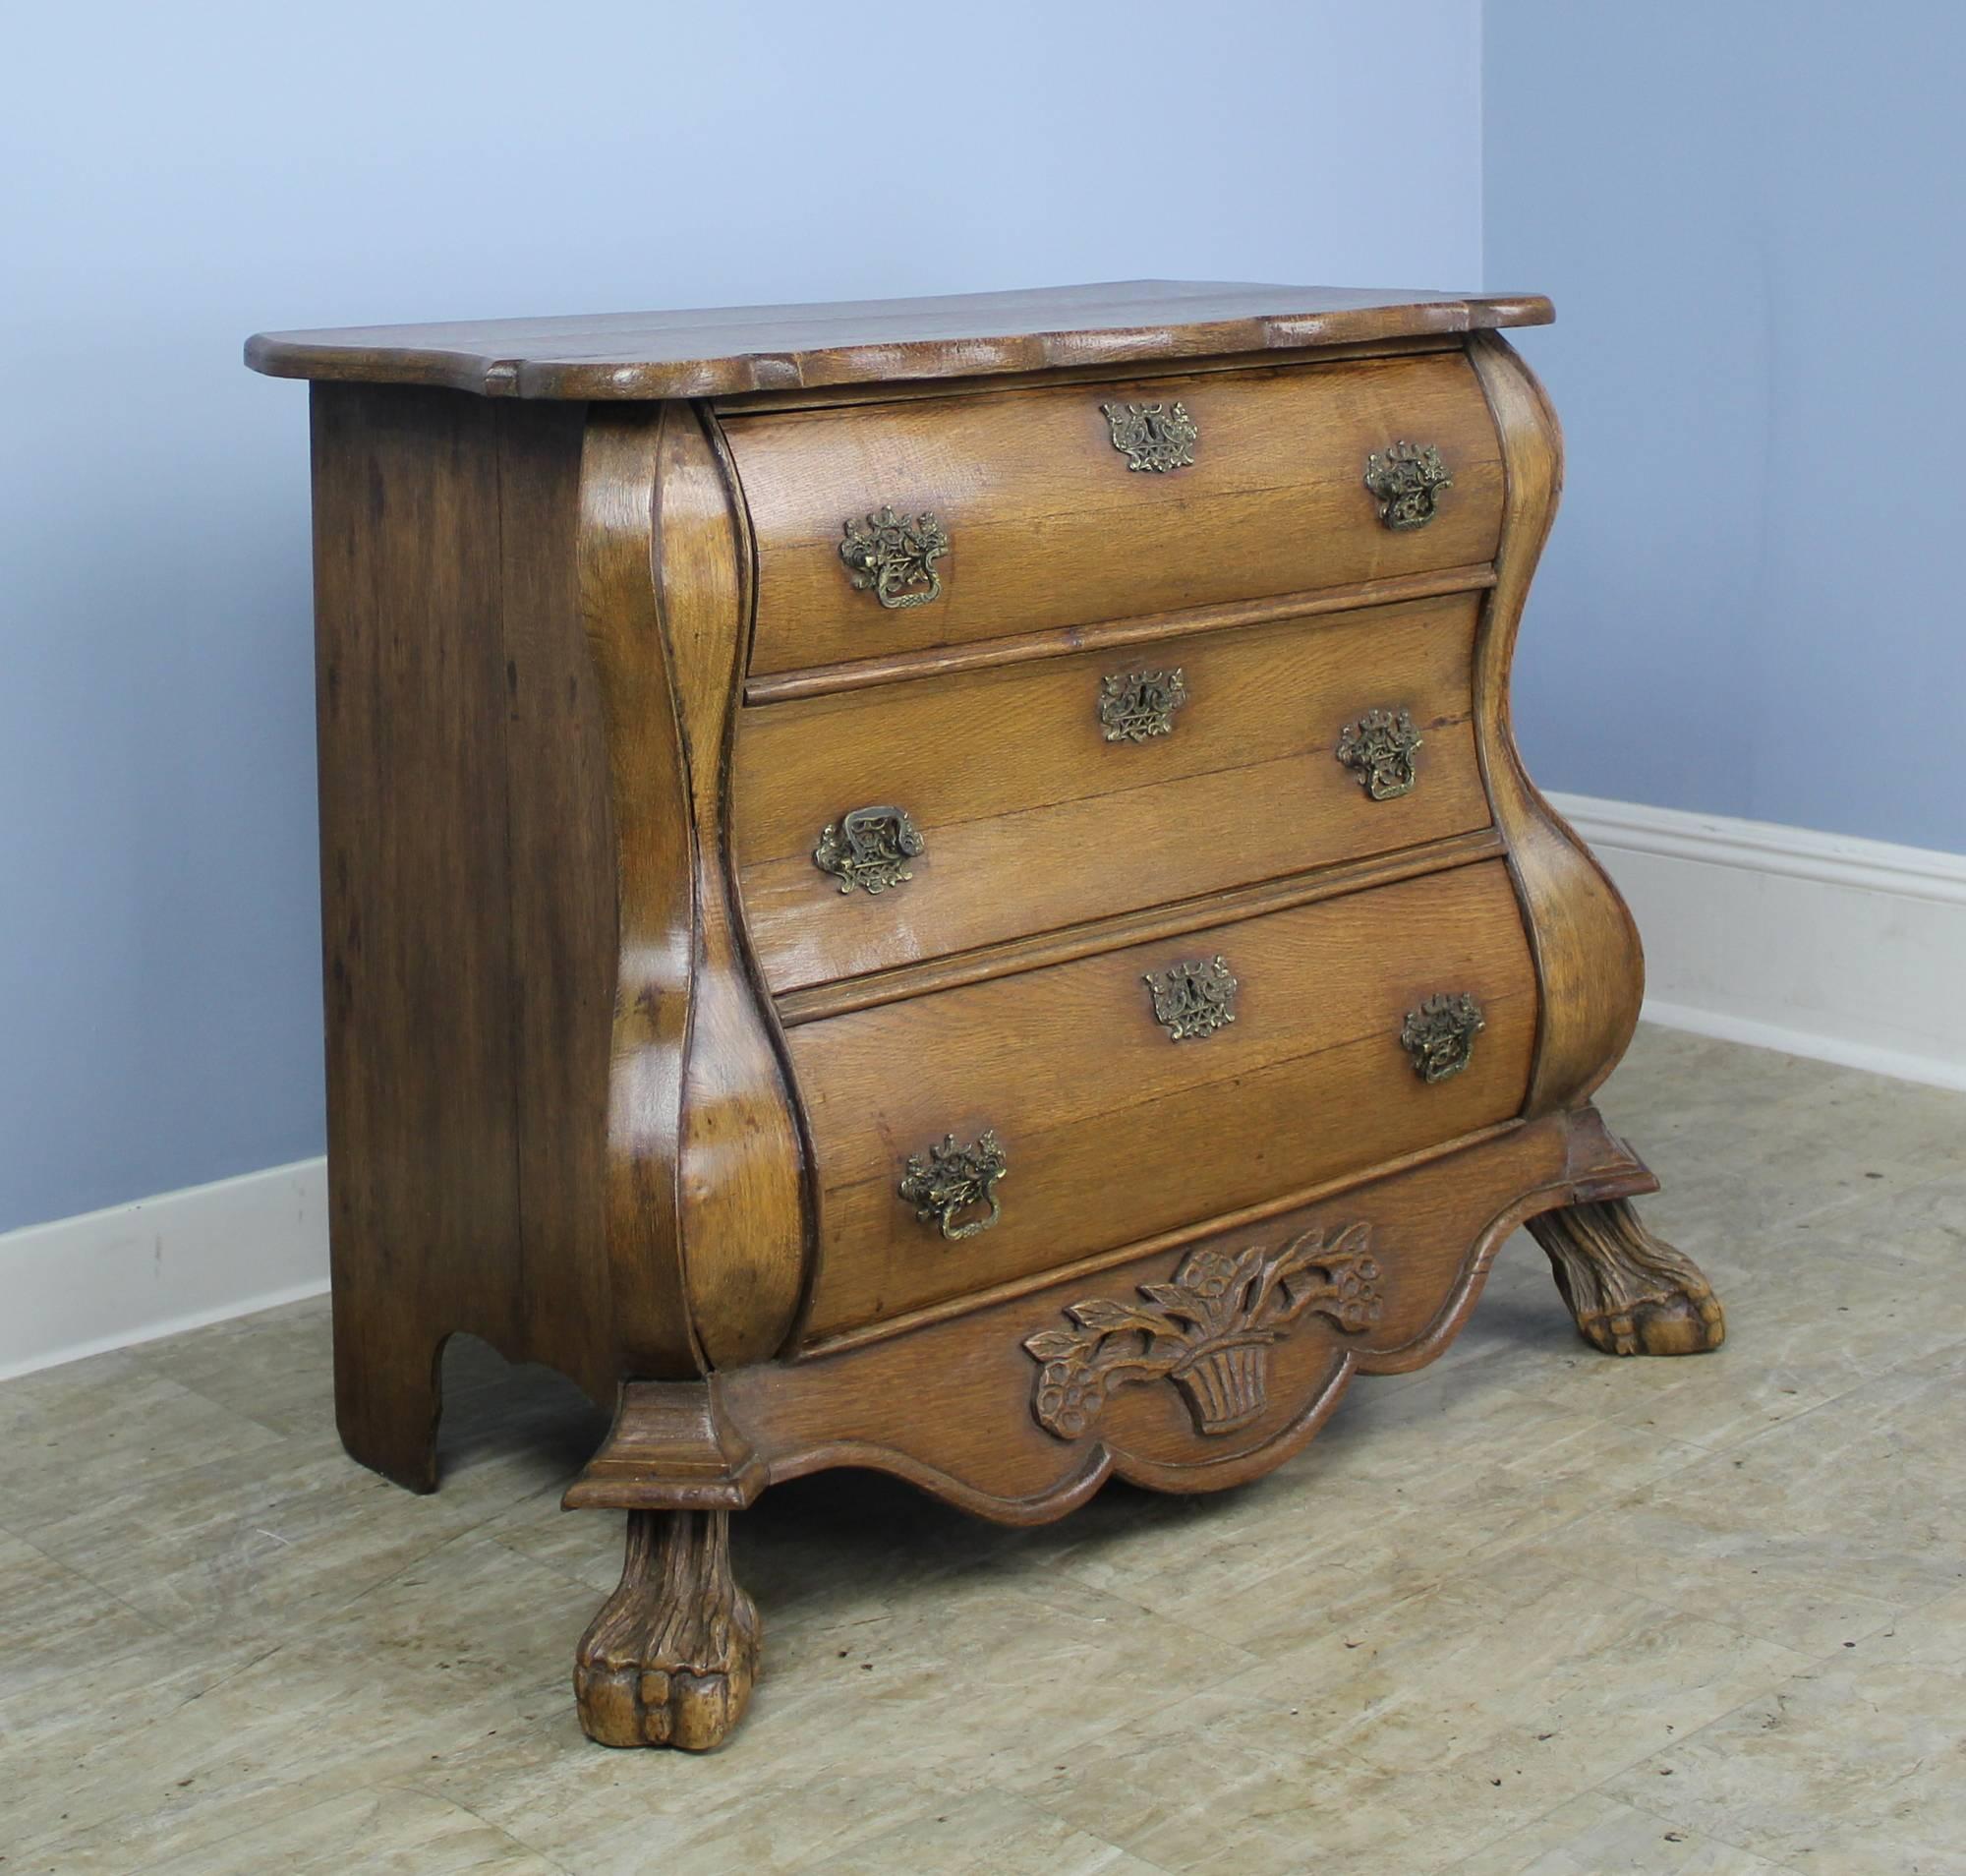 Fabulous early Dutch bombe chest, grand in presence. This four drawer bureau is made of mellow walnut with a beautiful color and rich patina. Details of note include all original handles, shaped and decoratively carved apron on the front, and a